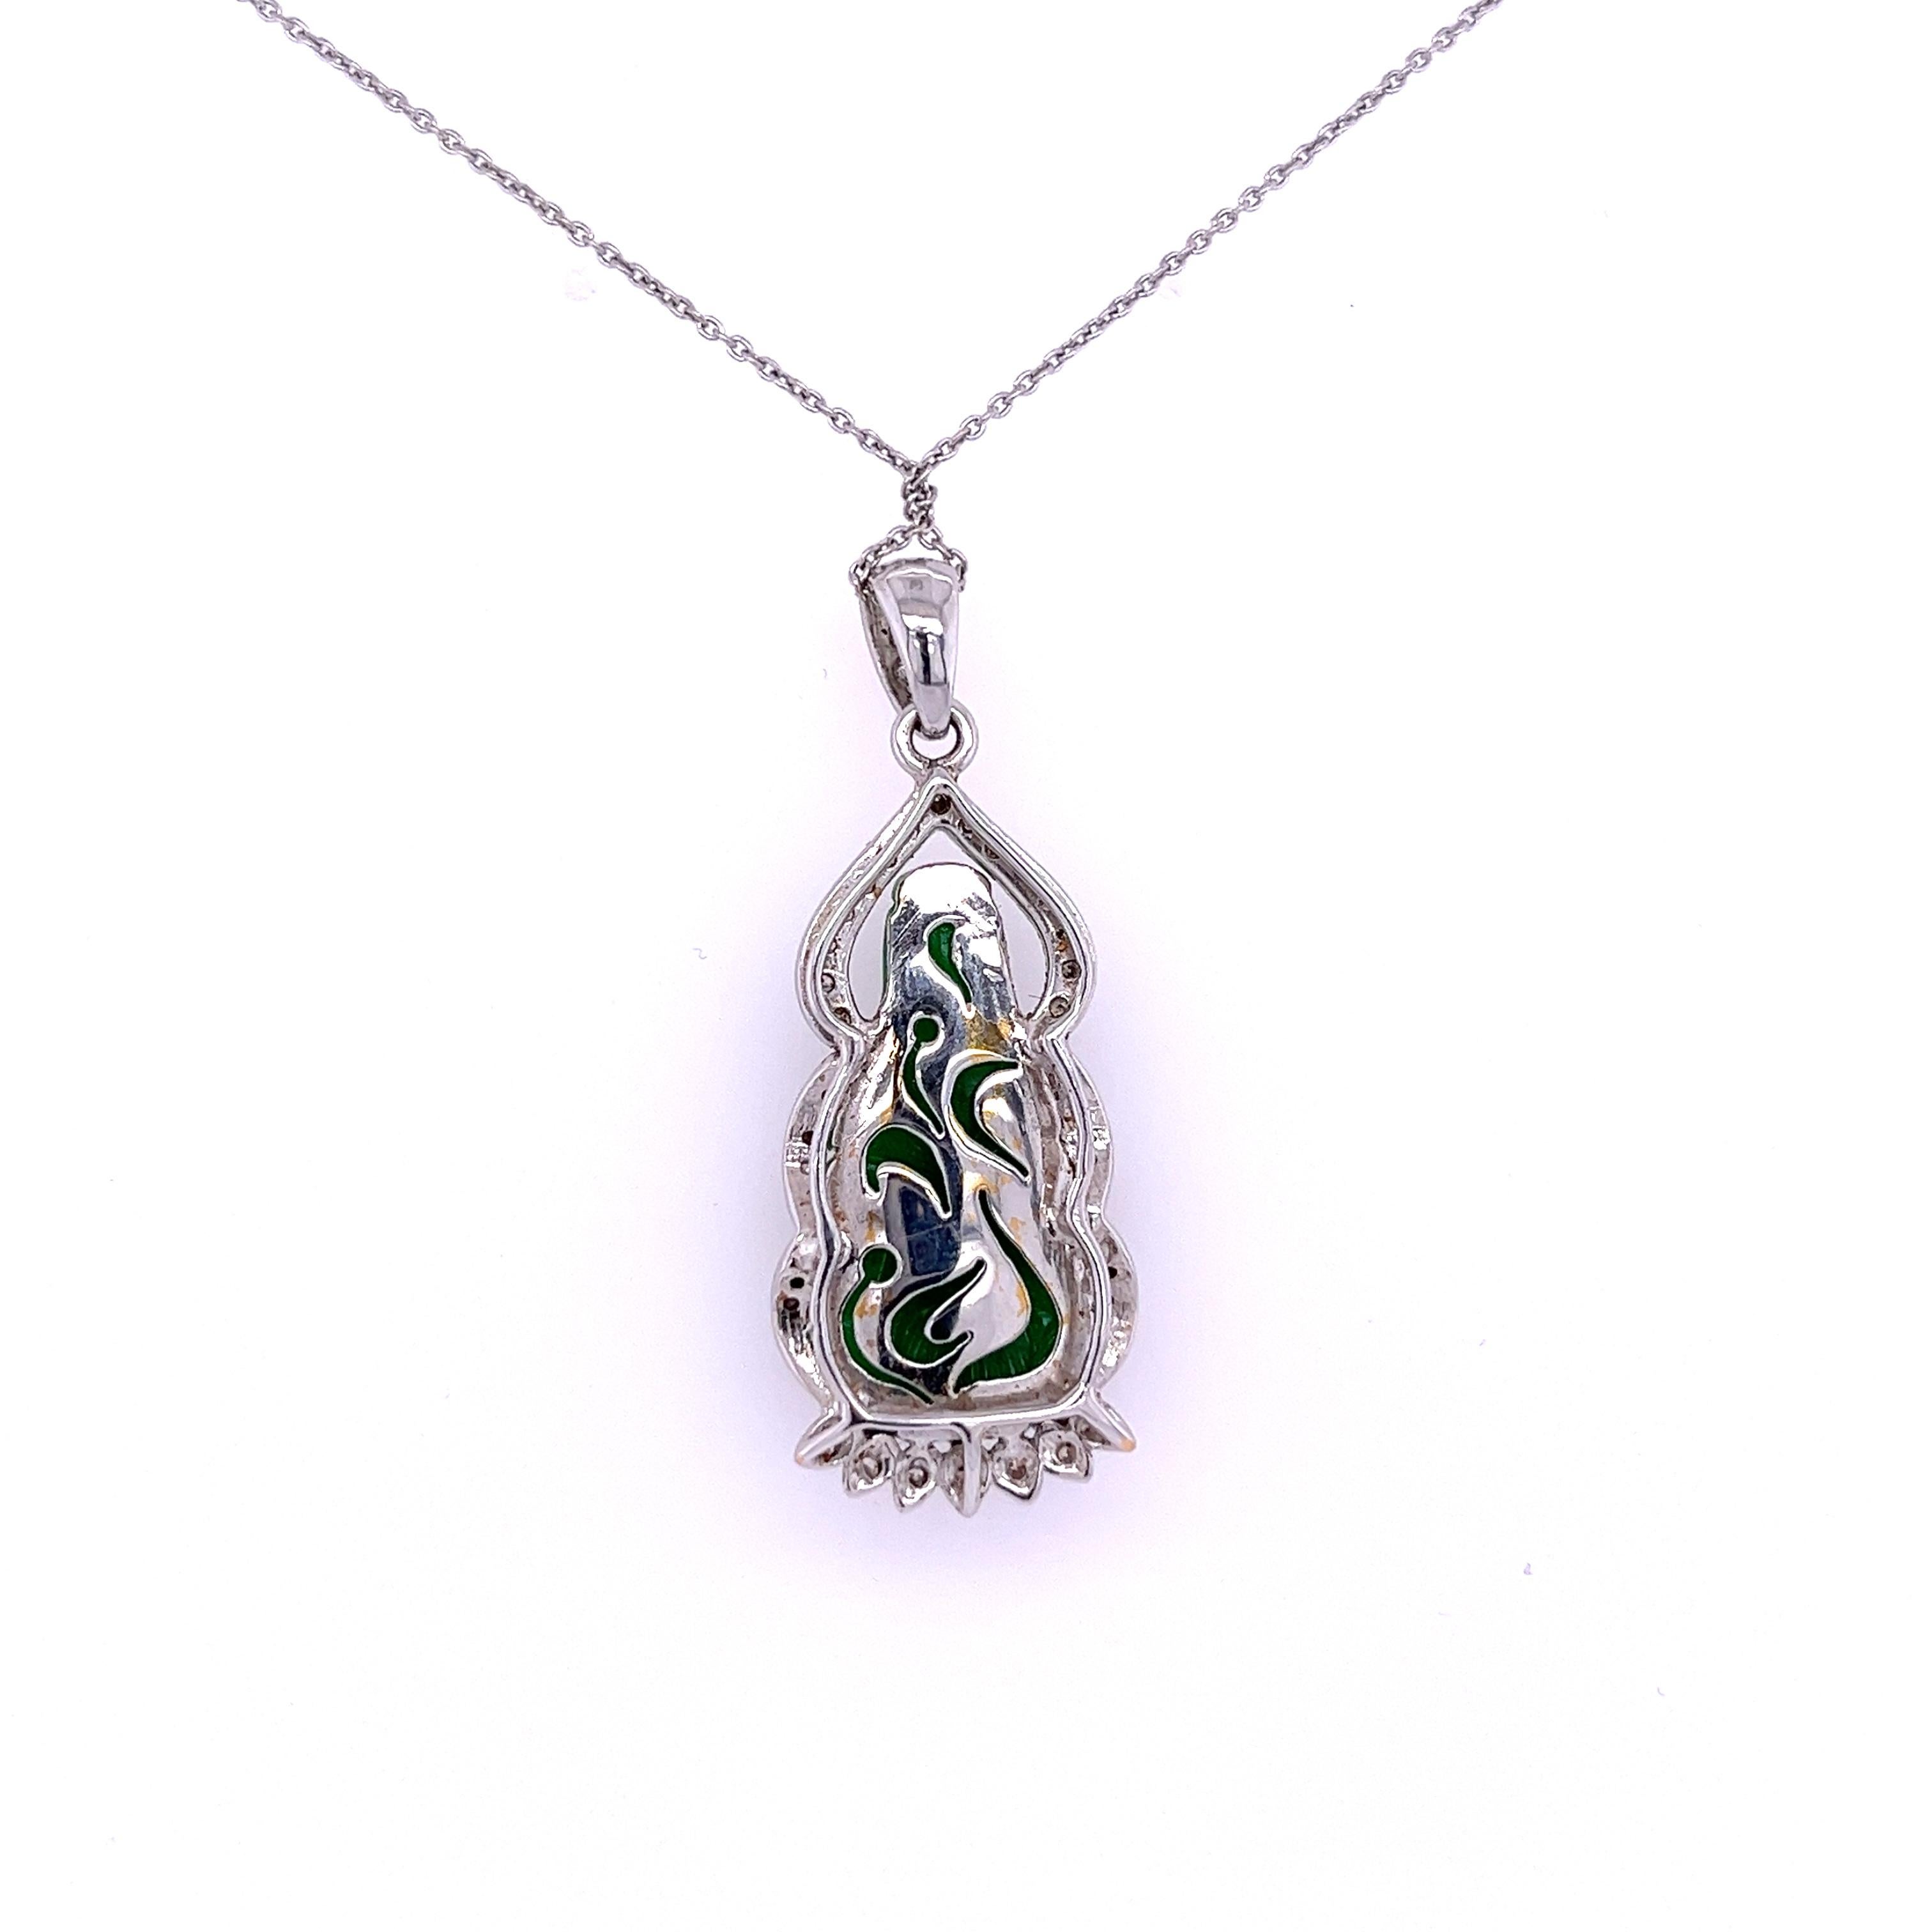 diamond side stones perfectly contrast the vibrance and deep green color hue of the Jade. 

This necklace is a fruitful manifestation of Chinese culture and history. Jade is distinctly Chinese, and a carved Buddha portrait is common in Jade jewelry